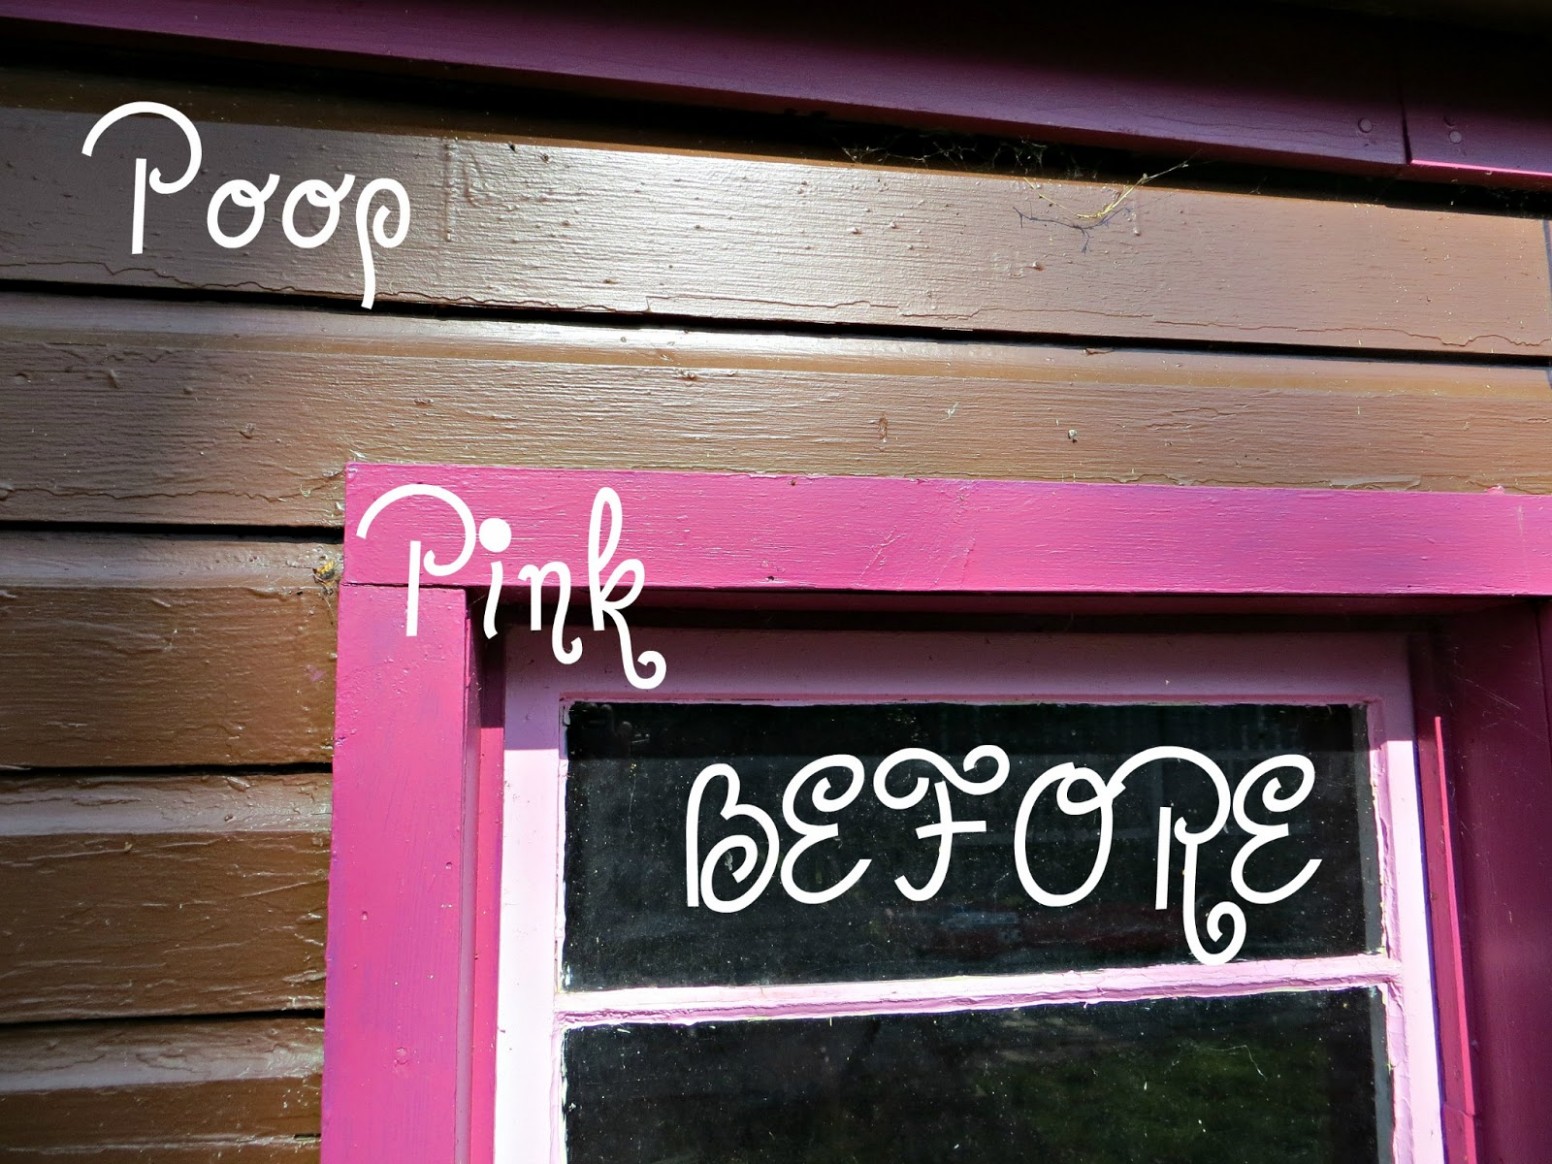 Annie Sloan Chalk Painted Shed You Can Diy Where To Buy Annie Sloan Chalk Paint In Maryland